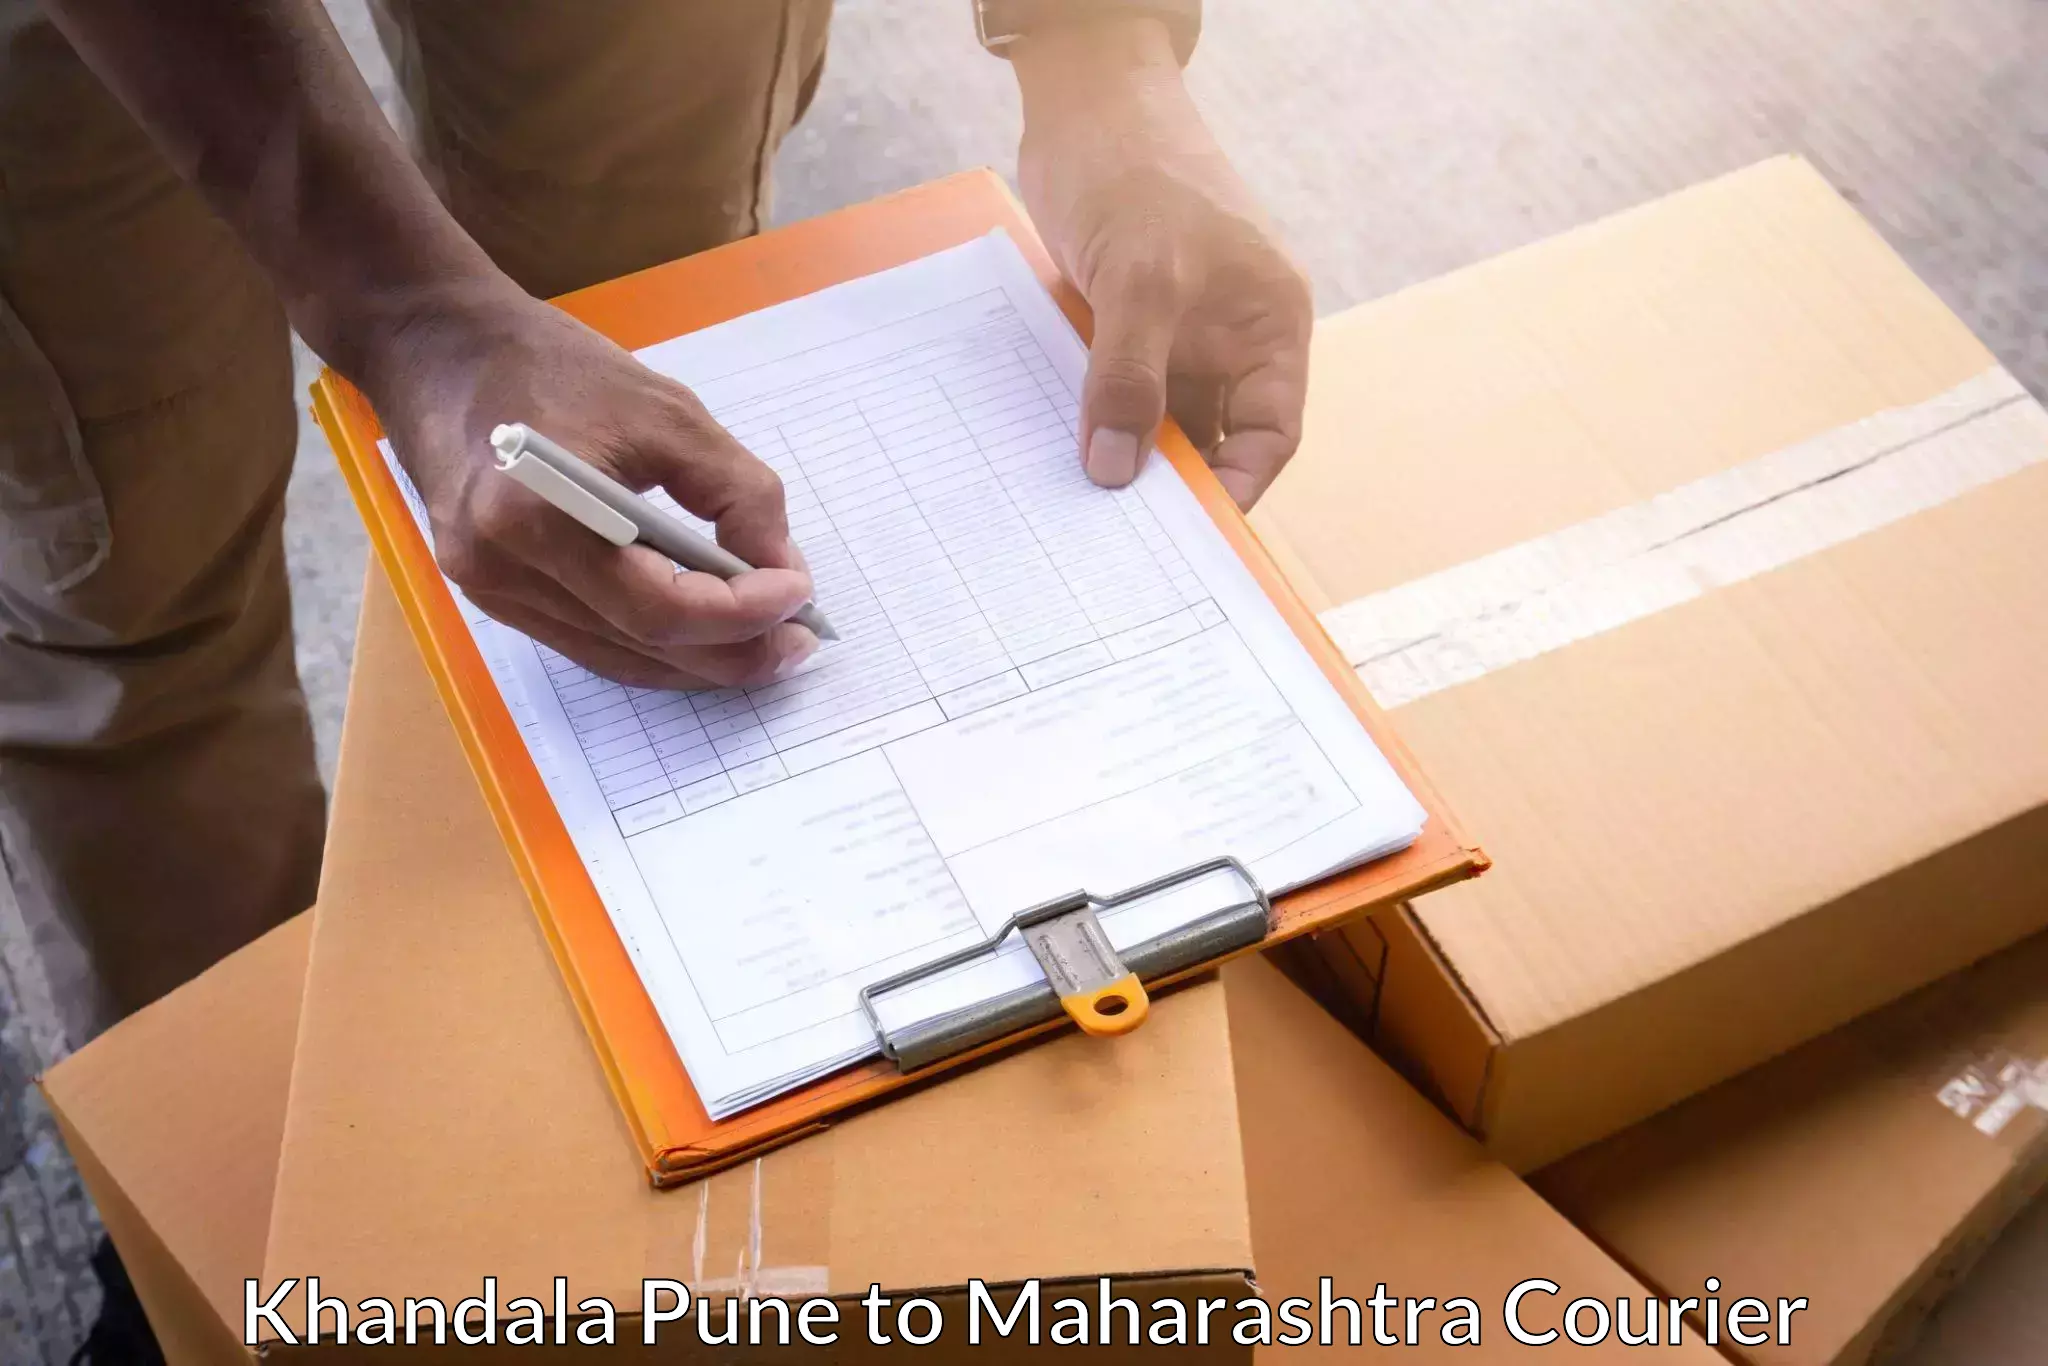 Courier services Khandala Pune to Alephata